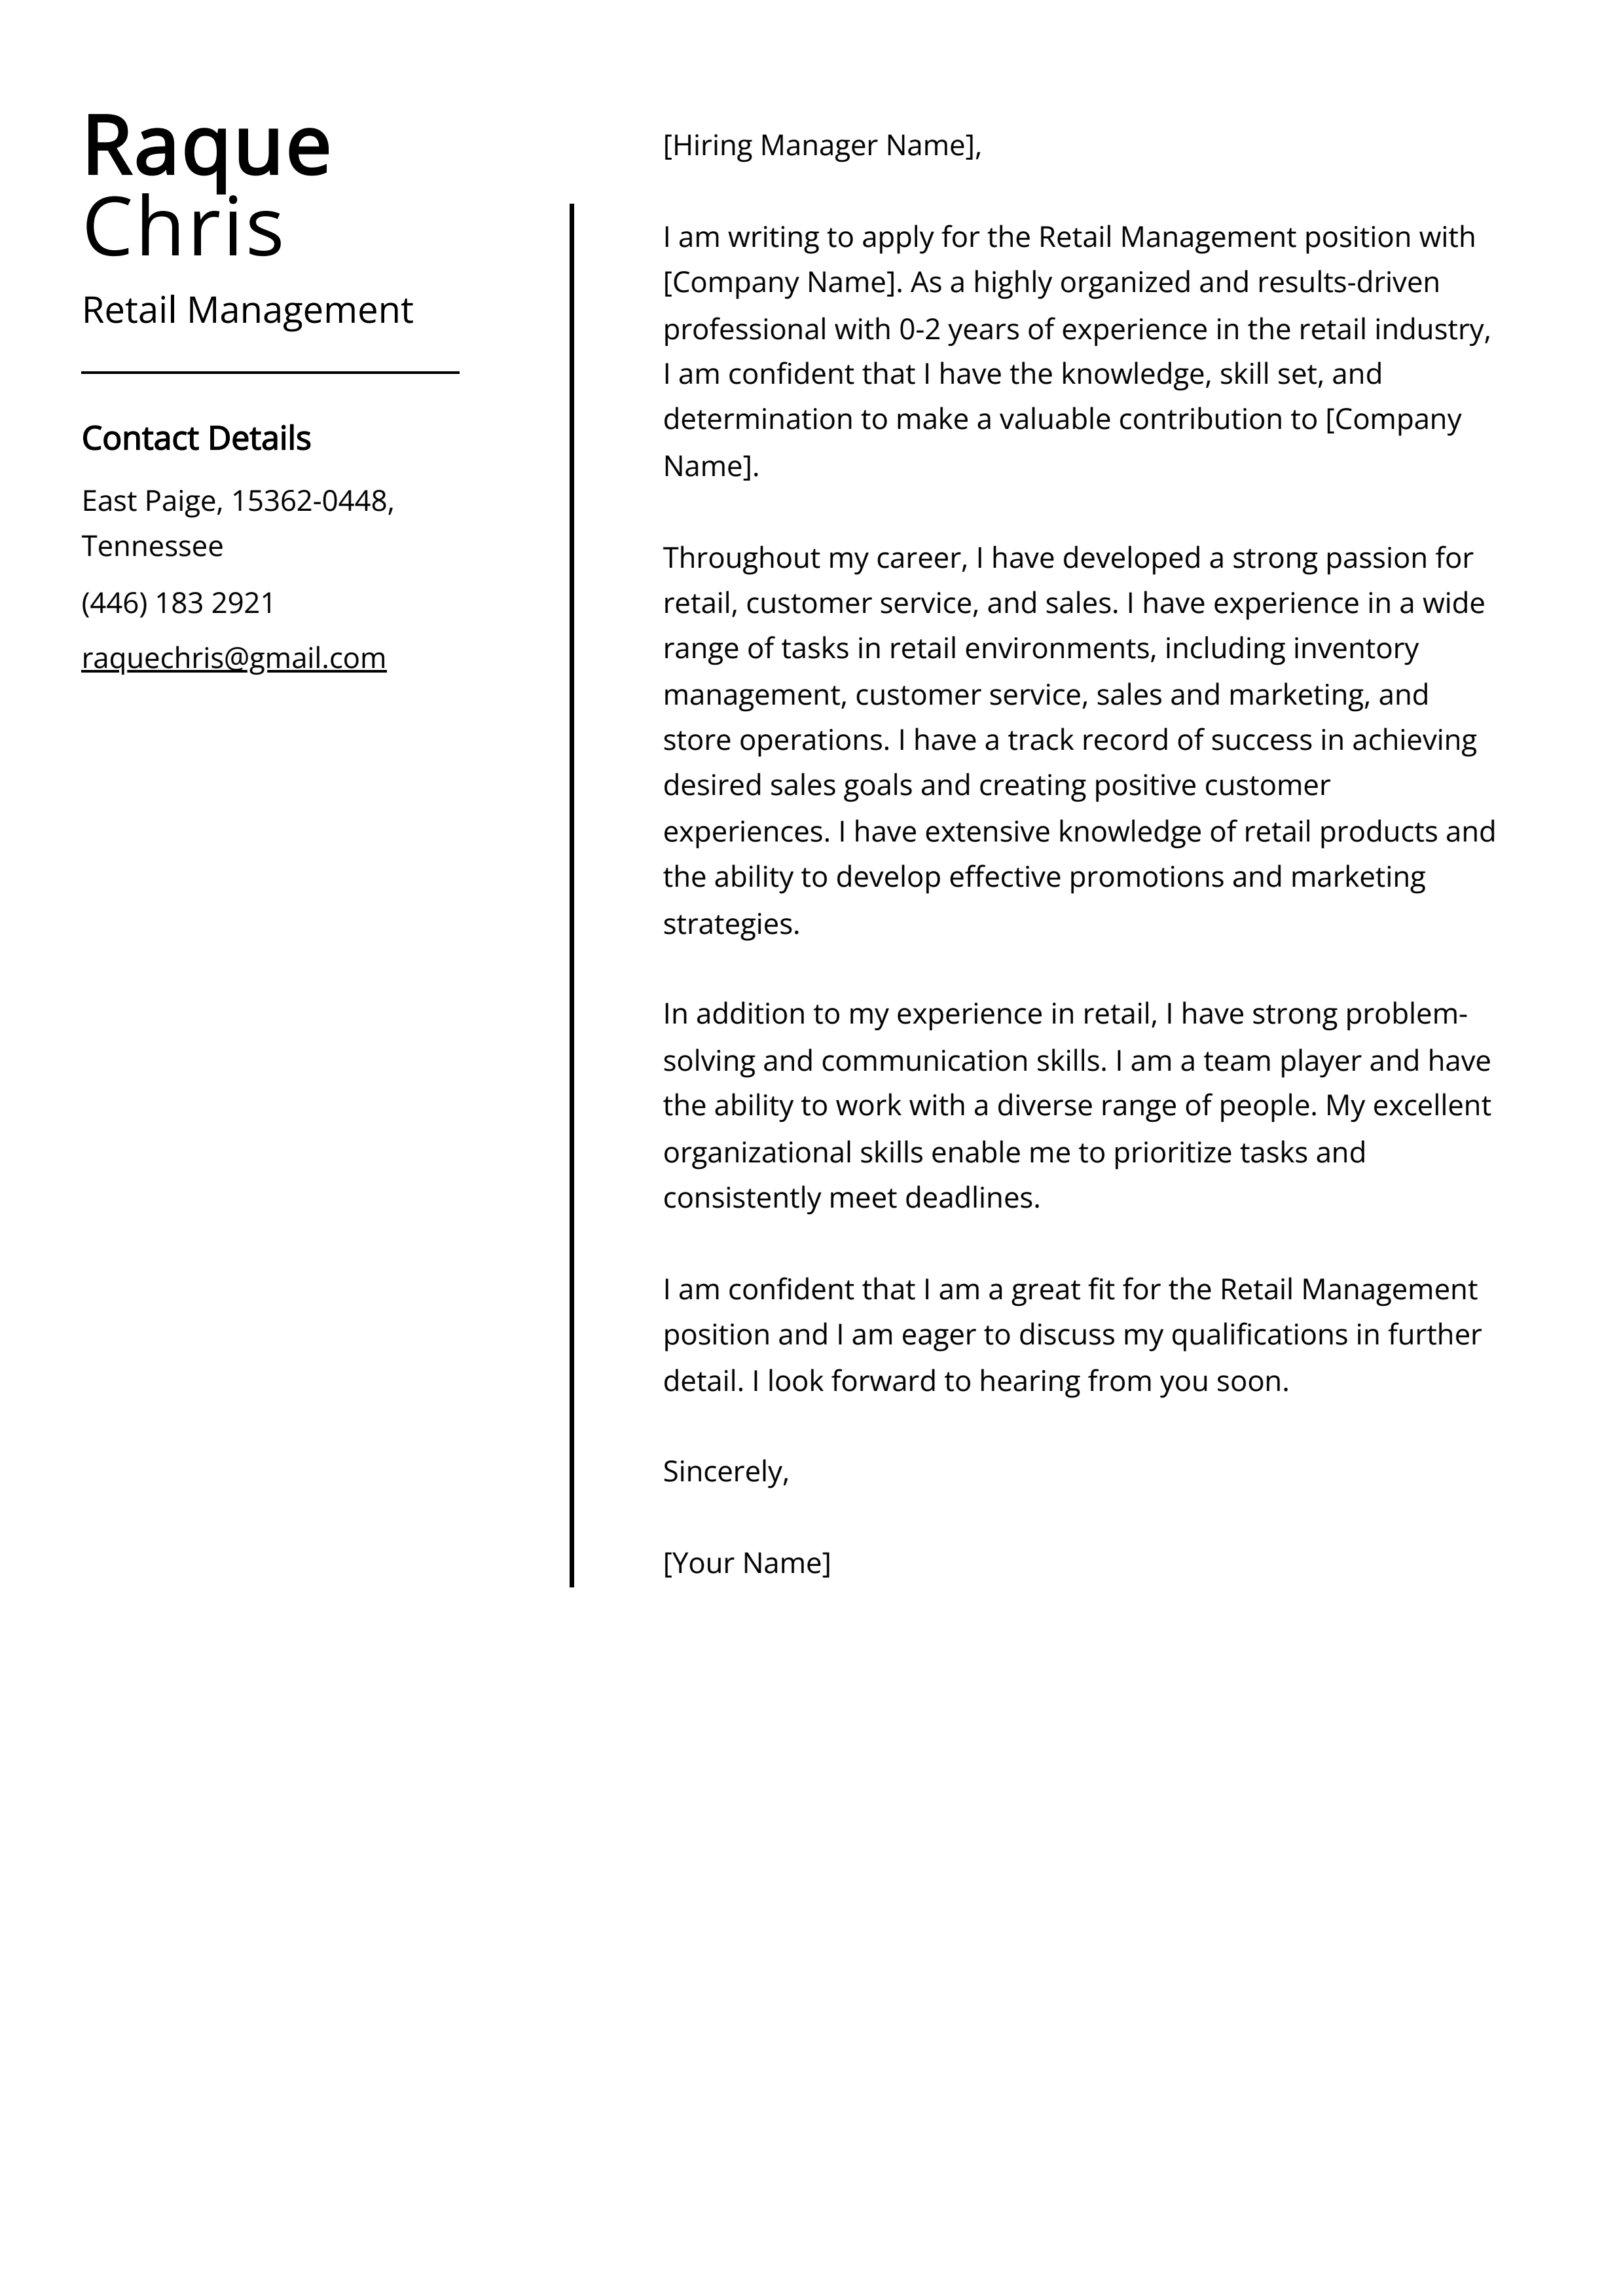 Retail Management Cover Letter Example